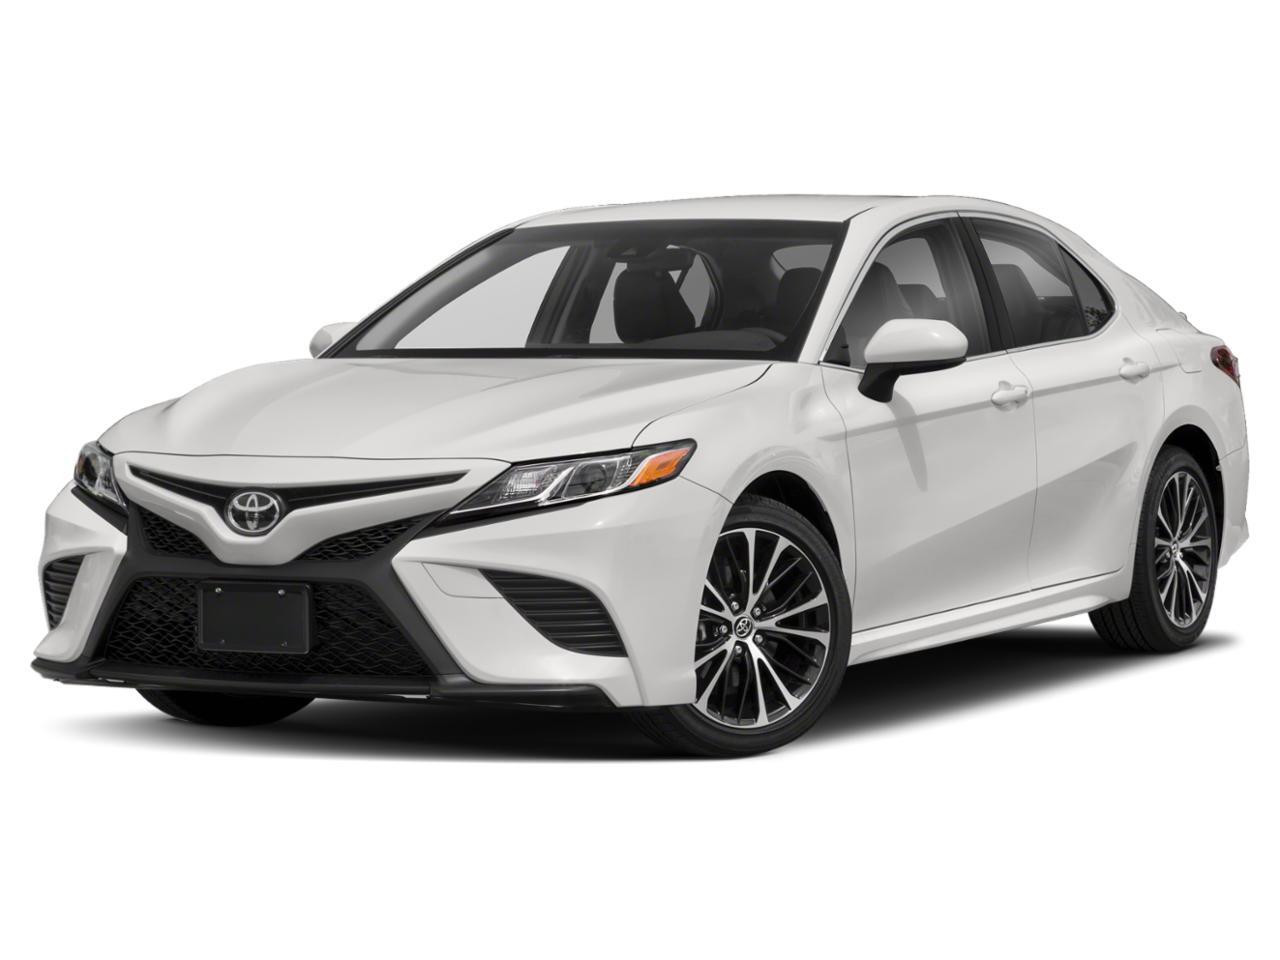 2020 Toyota Camry For Sale at Brantford Toyota - 4T1G11AK5LU329769